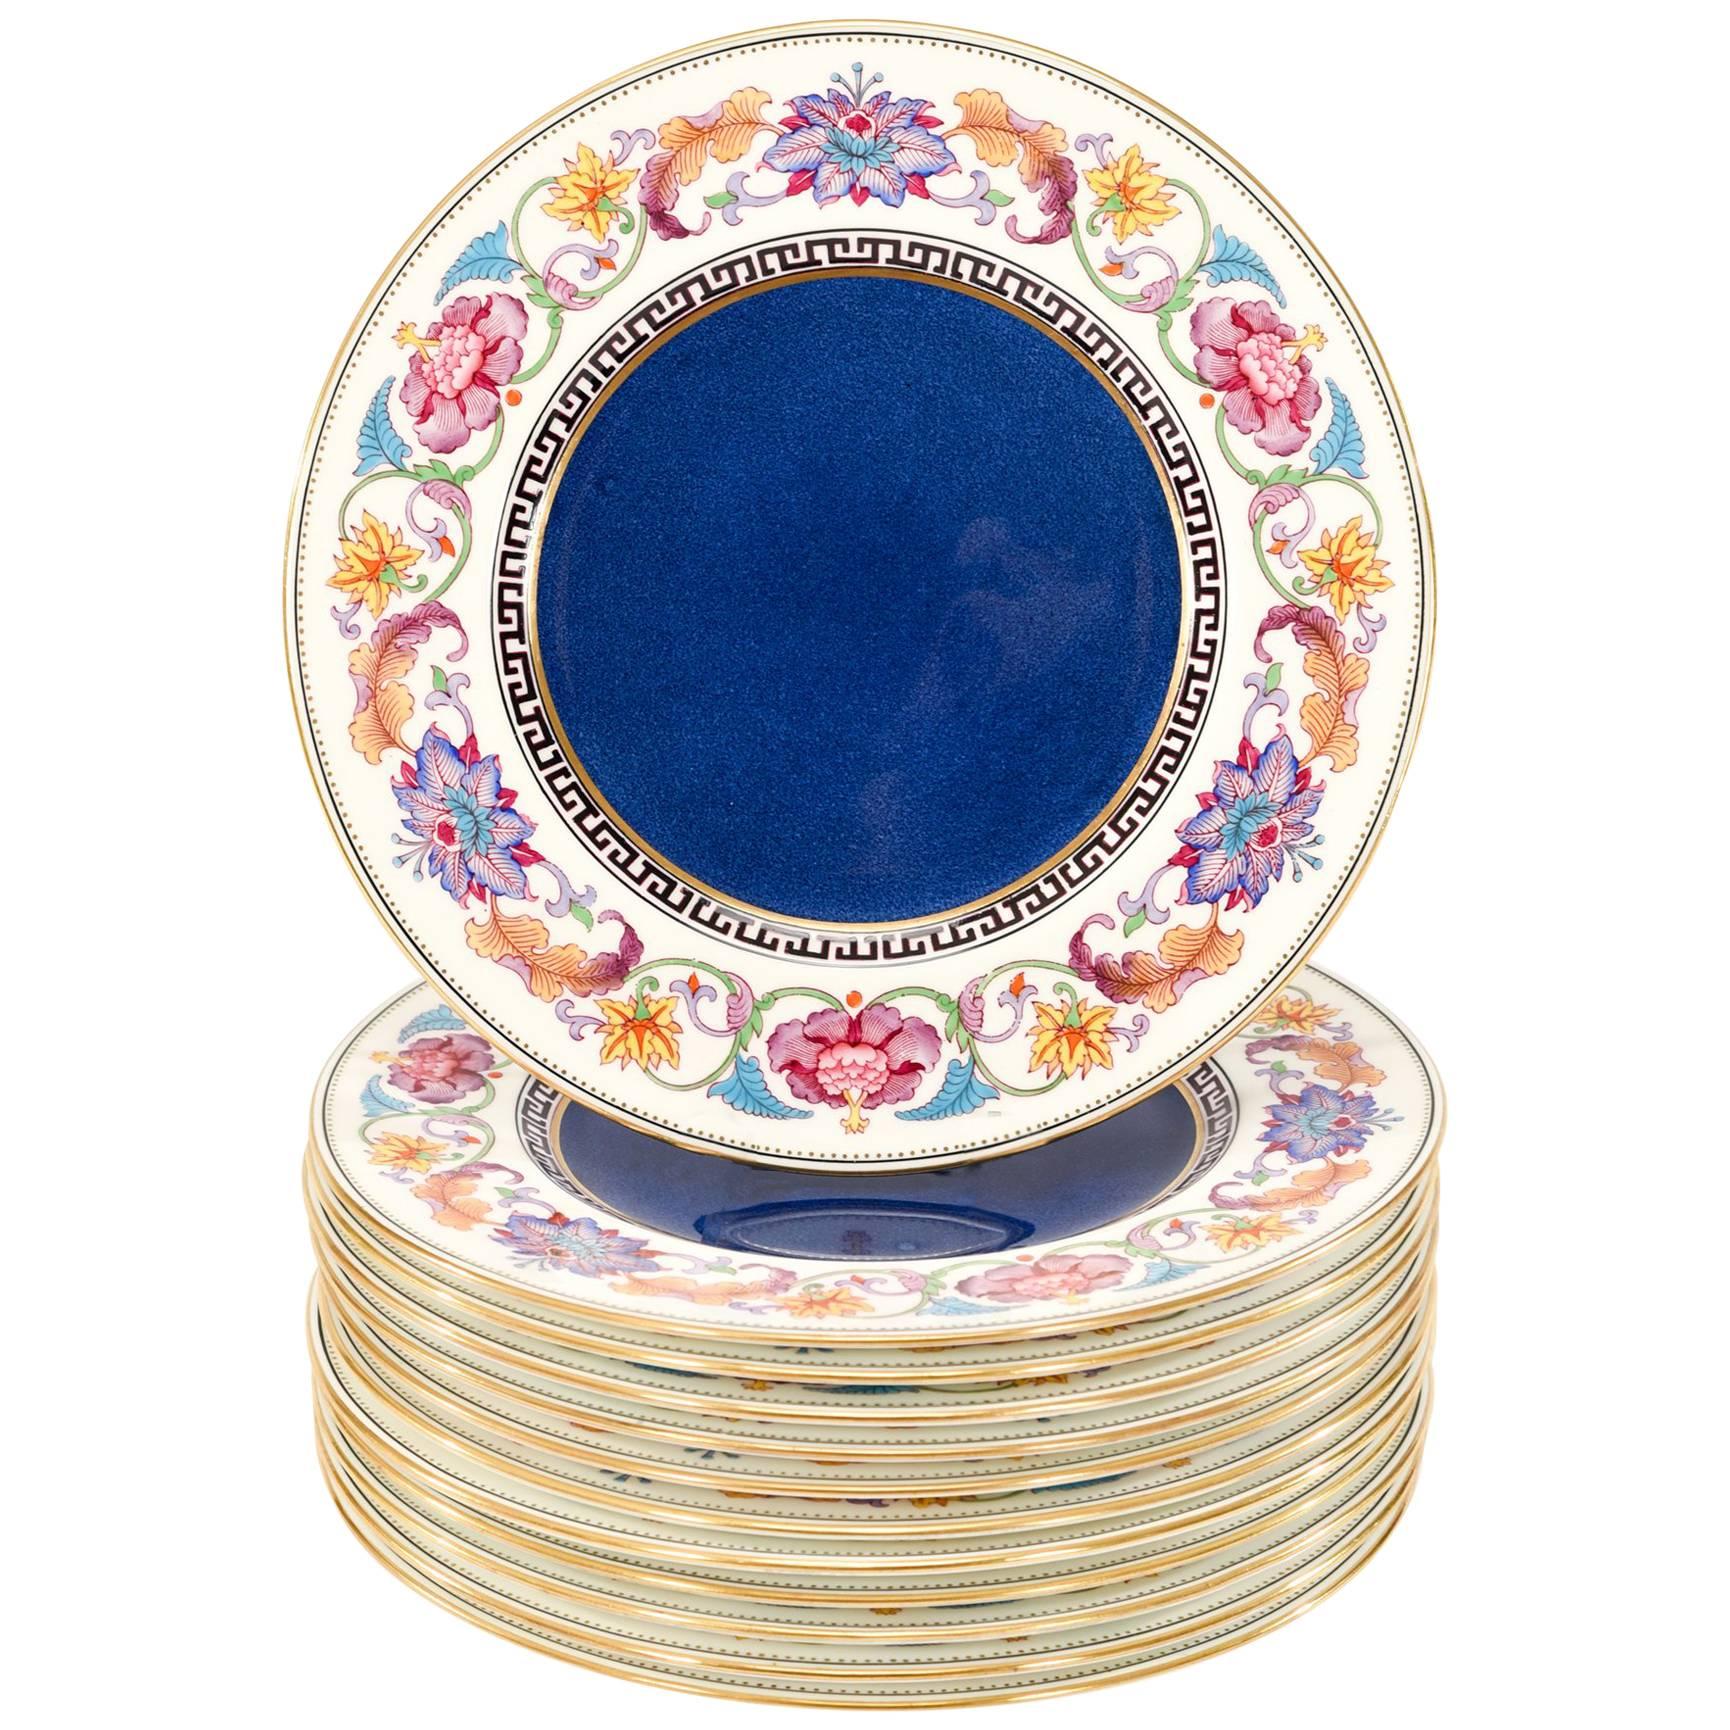 Set of 12 Wedgwood Dinner Plates with Cobalt Centers & Aesthetic Movement Enamel